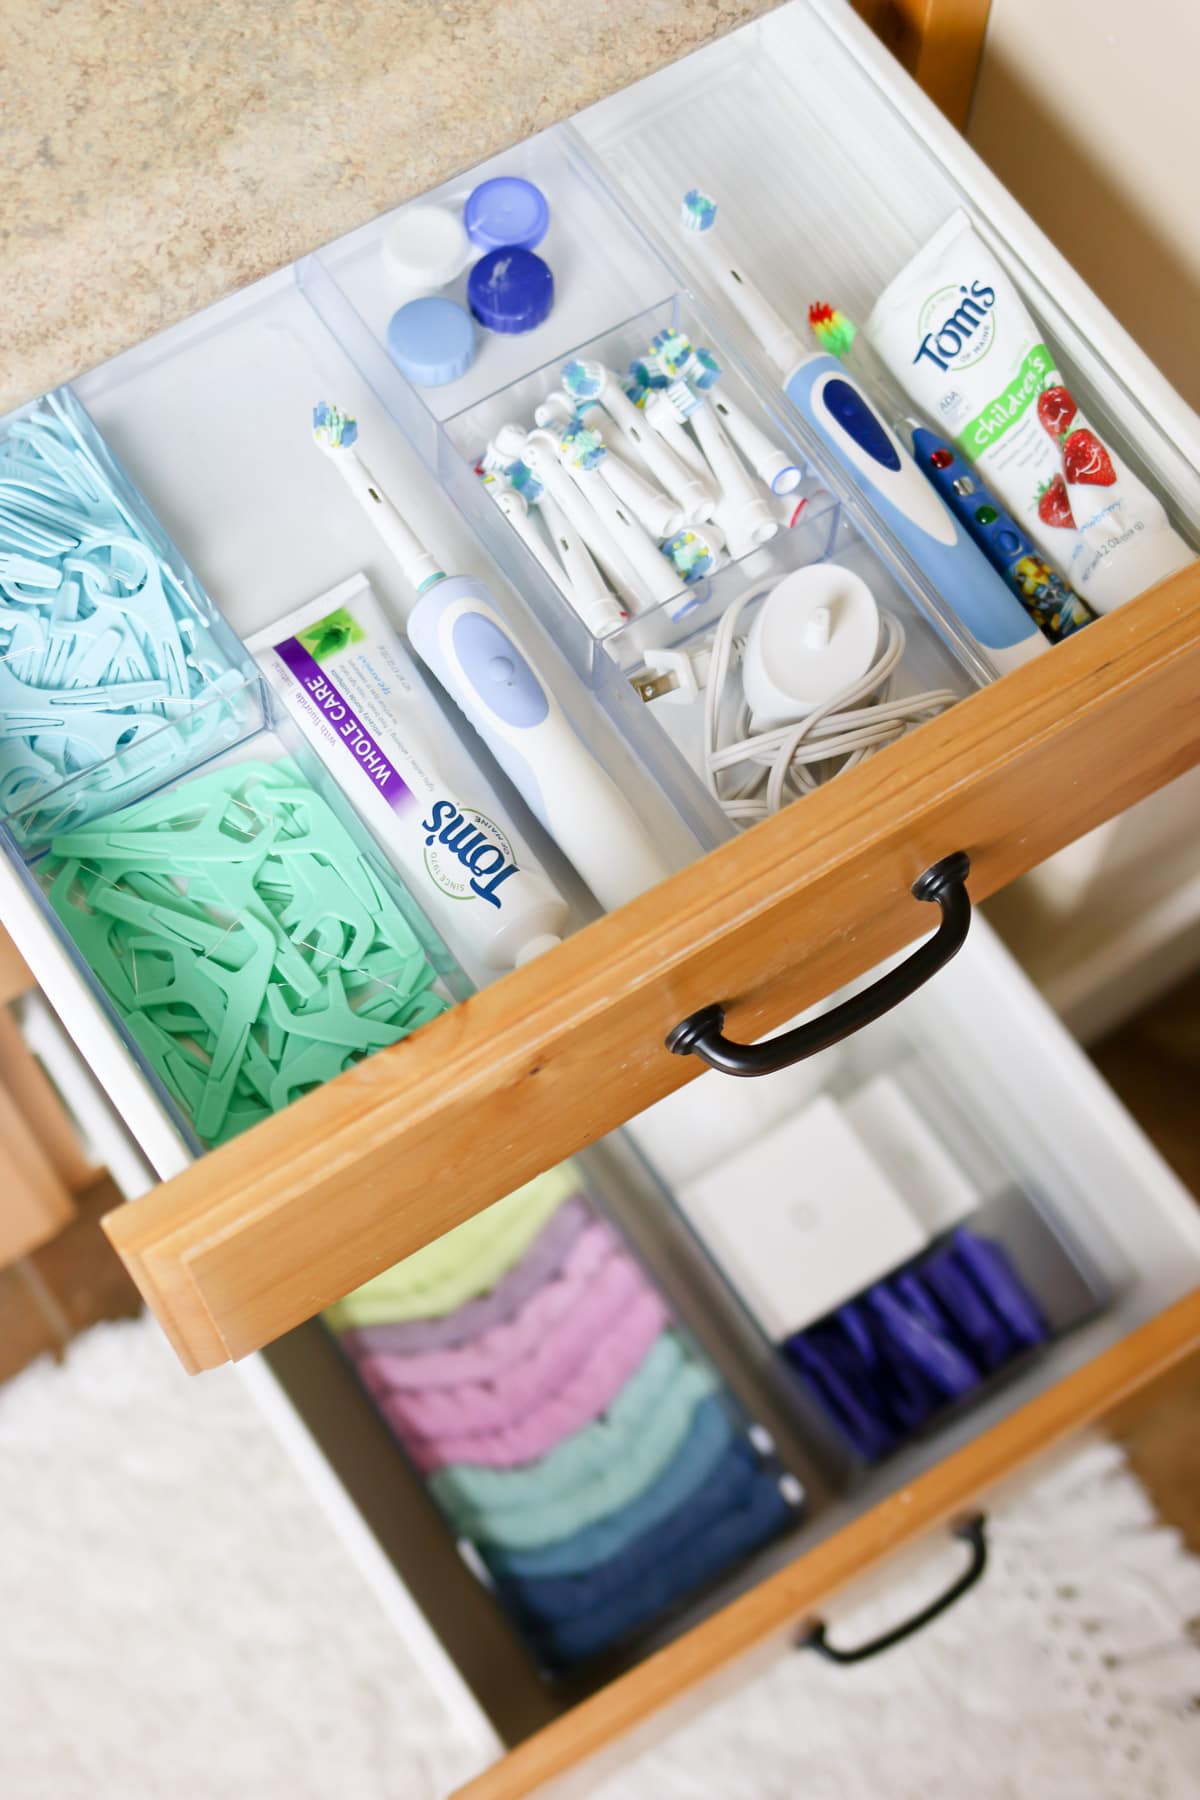 Supplies, tips and ideas for organizing bathroom drawers and cupboards.